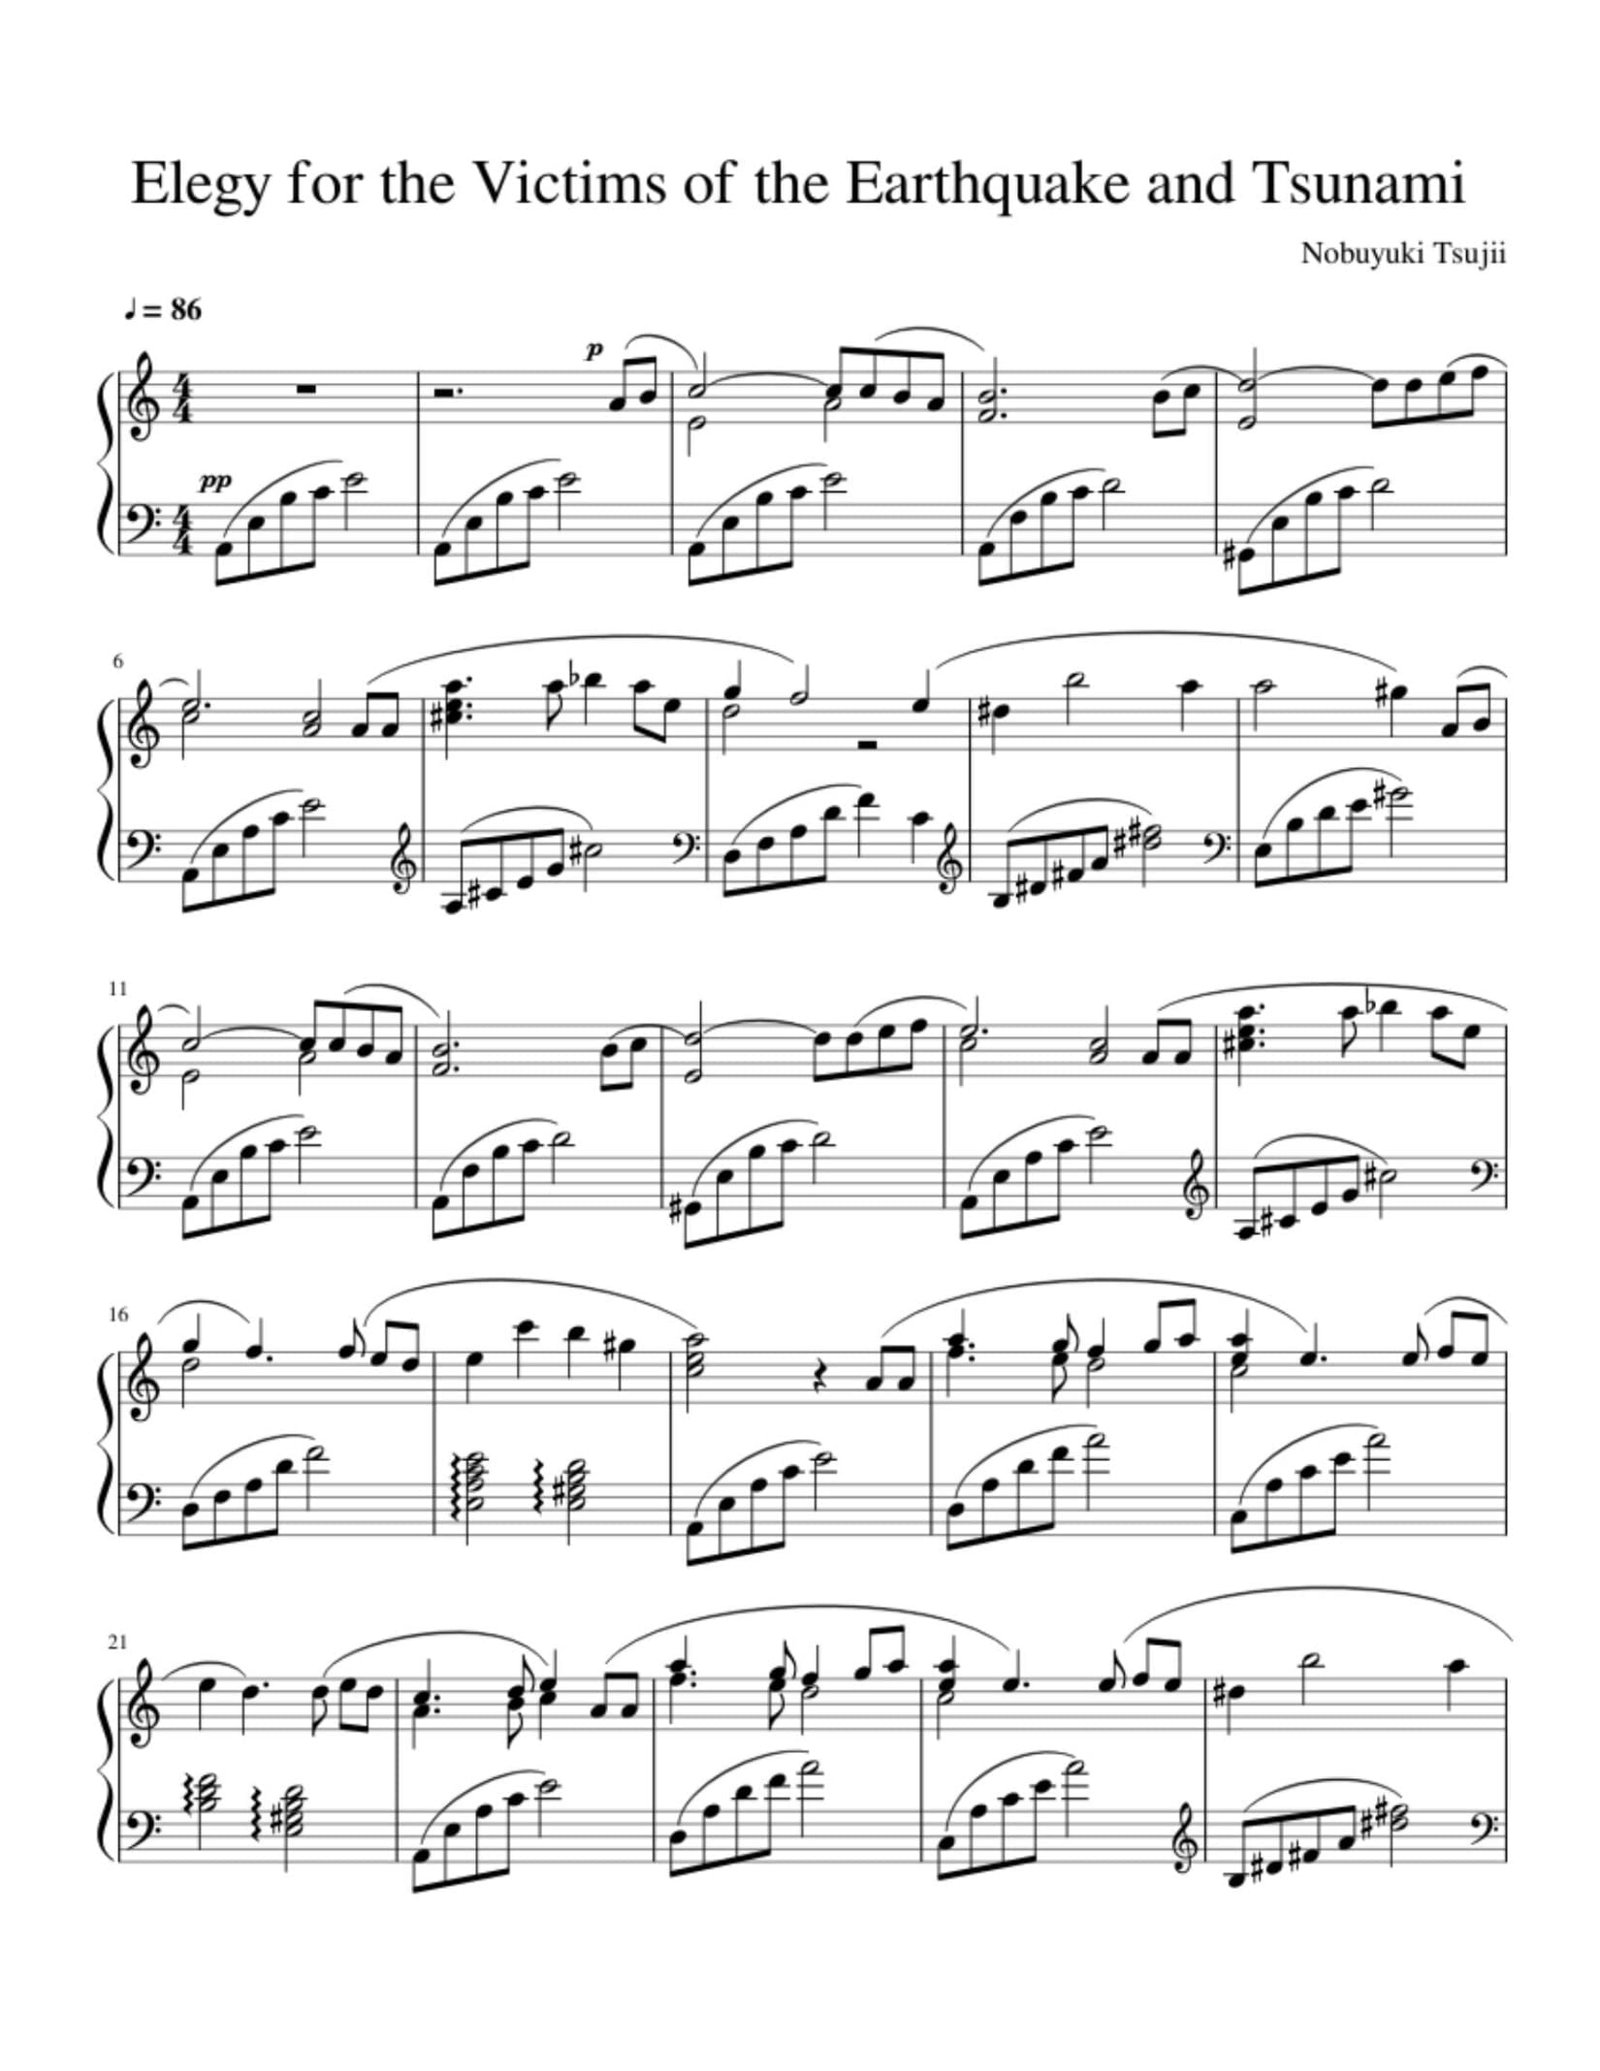 elegy for the victims sheet music download partitura partition spartiti